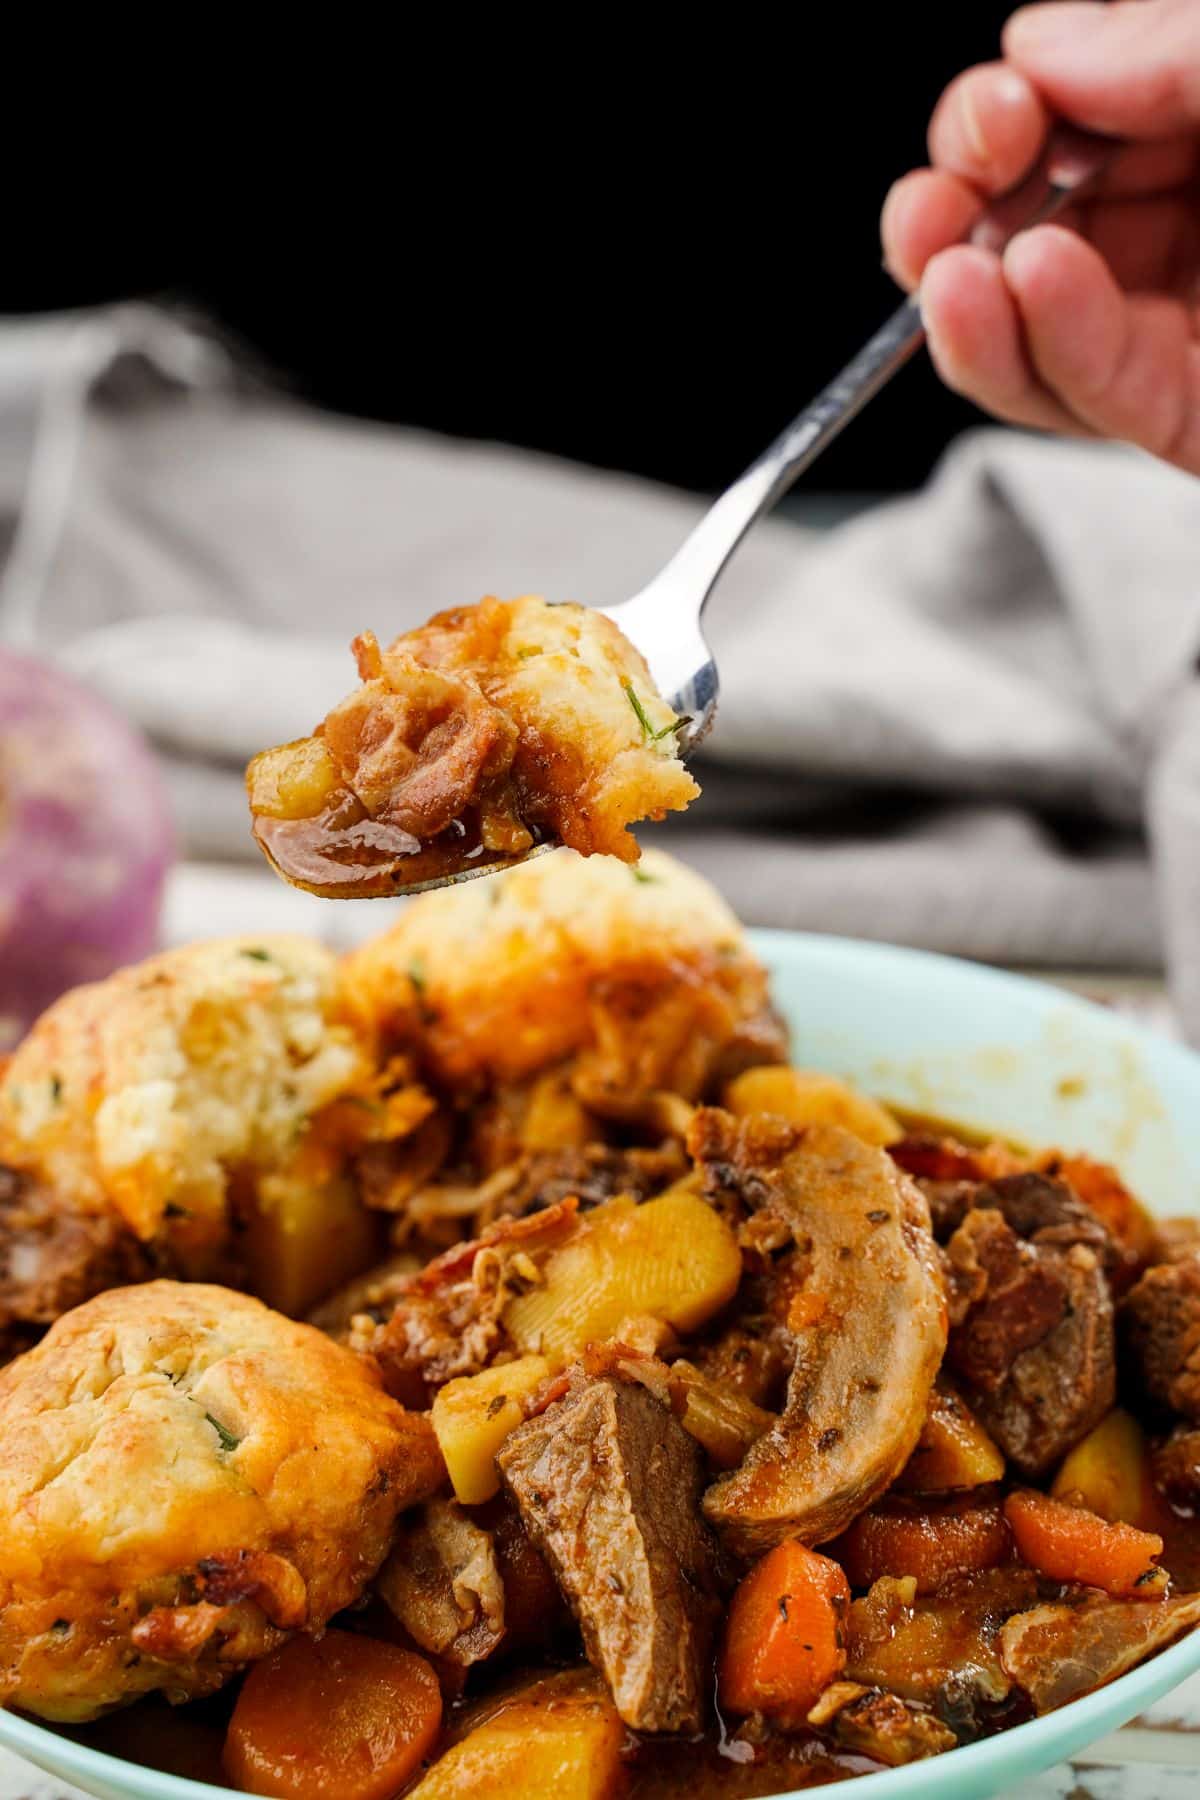 spoon of stew hovering above bowl topped by cheddar biscuits